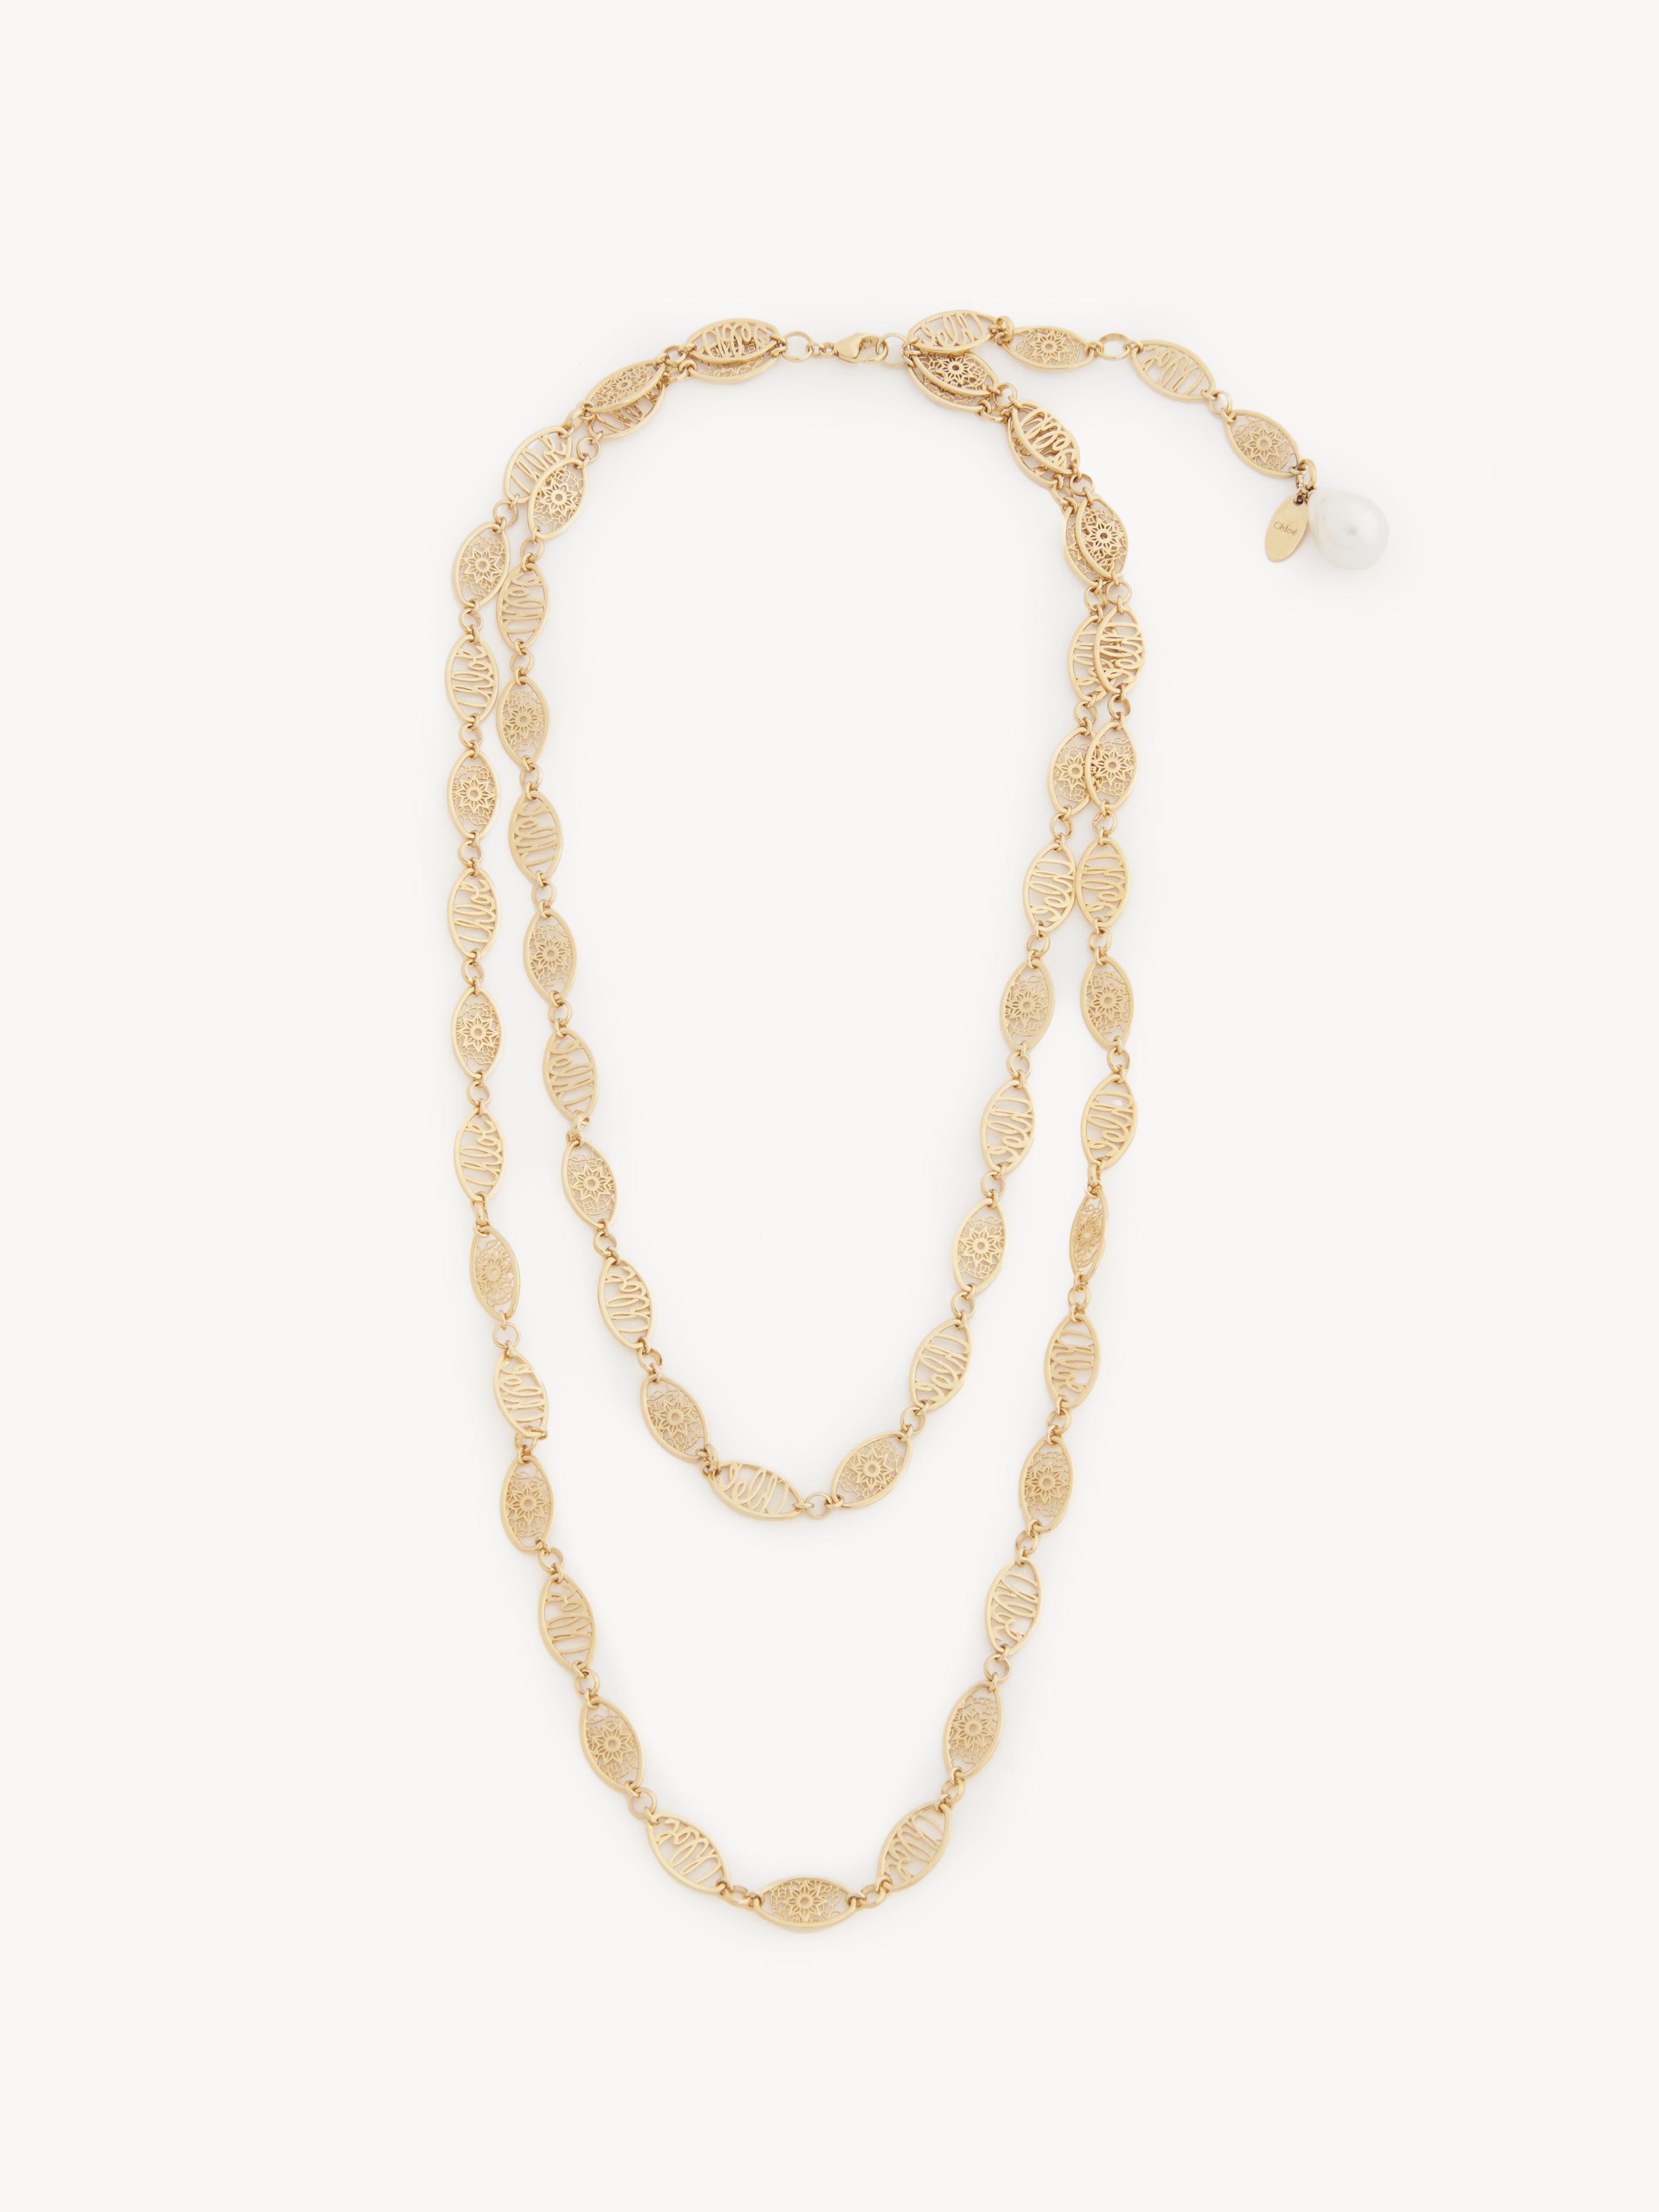 CHLOÉ DARCEY LACE NECKLACE GOLD SIZE ONESIZE 100% BRASS, HYRIOPSIS CUMINGII, FARMED, COO CHINA